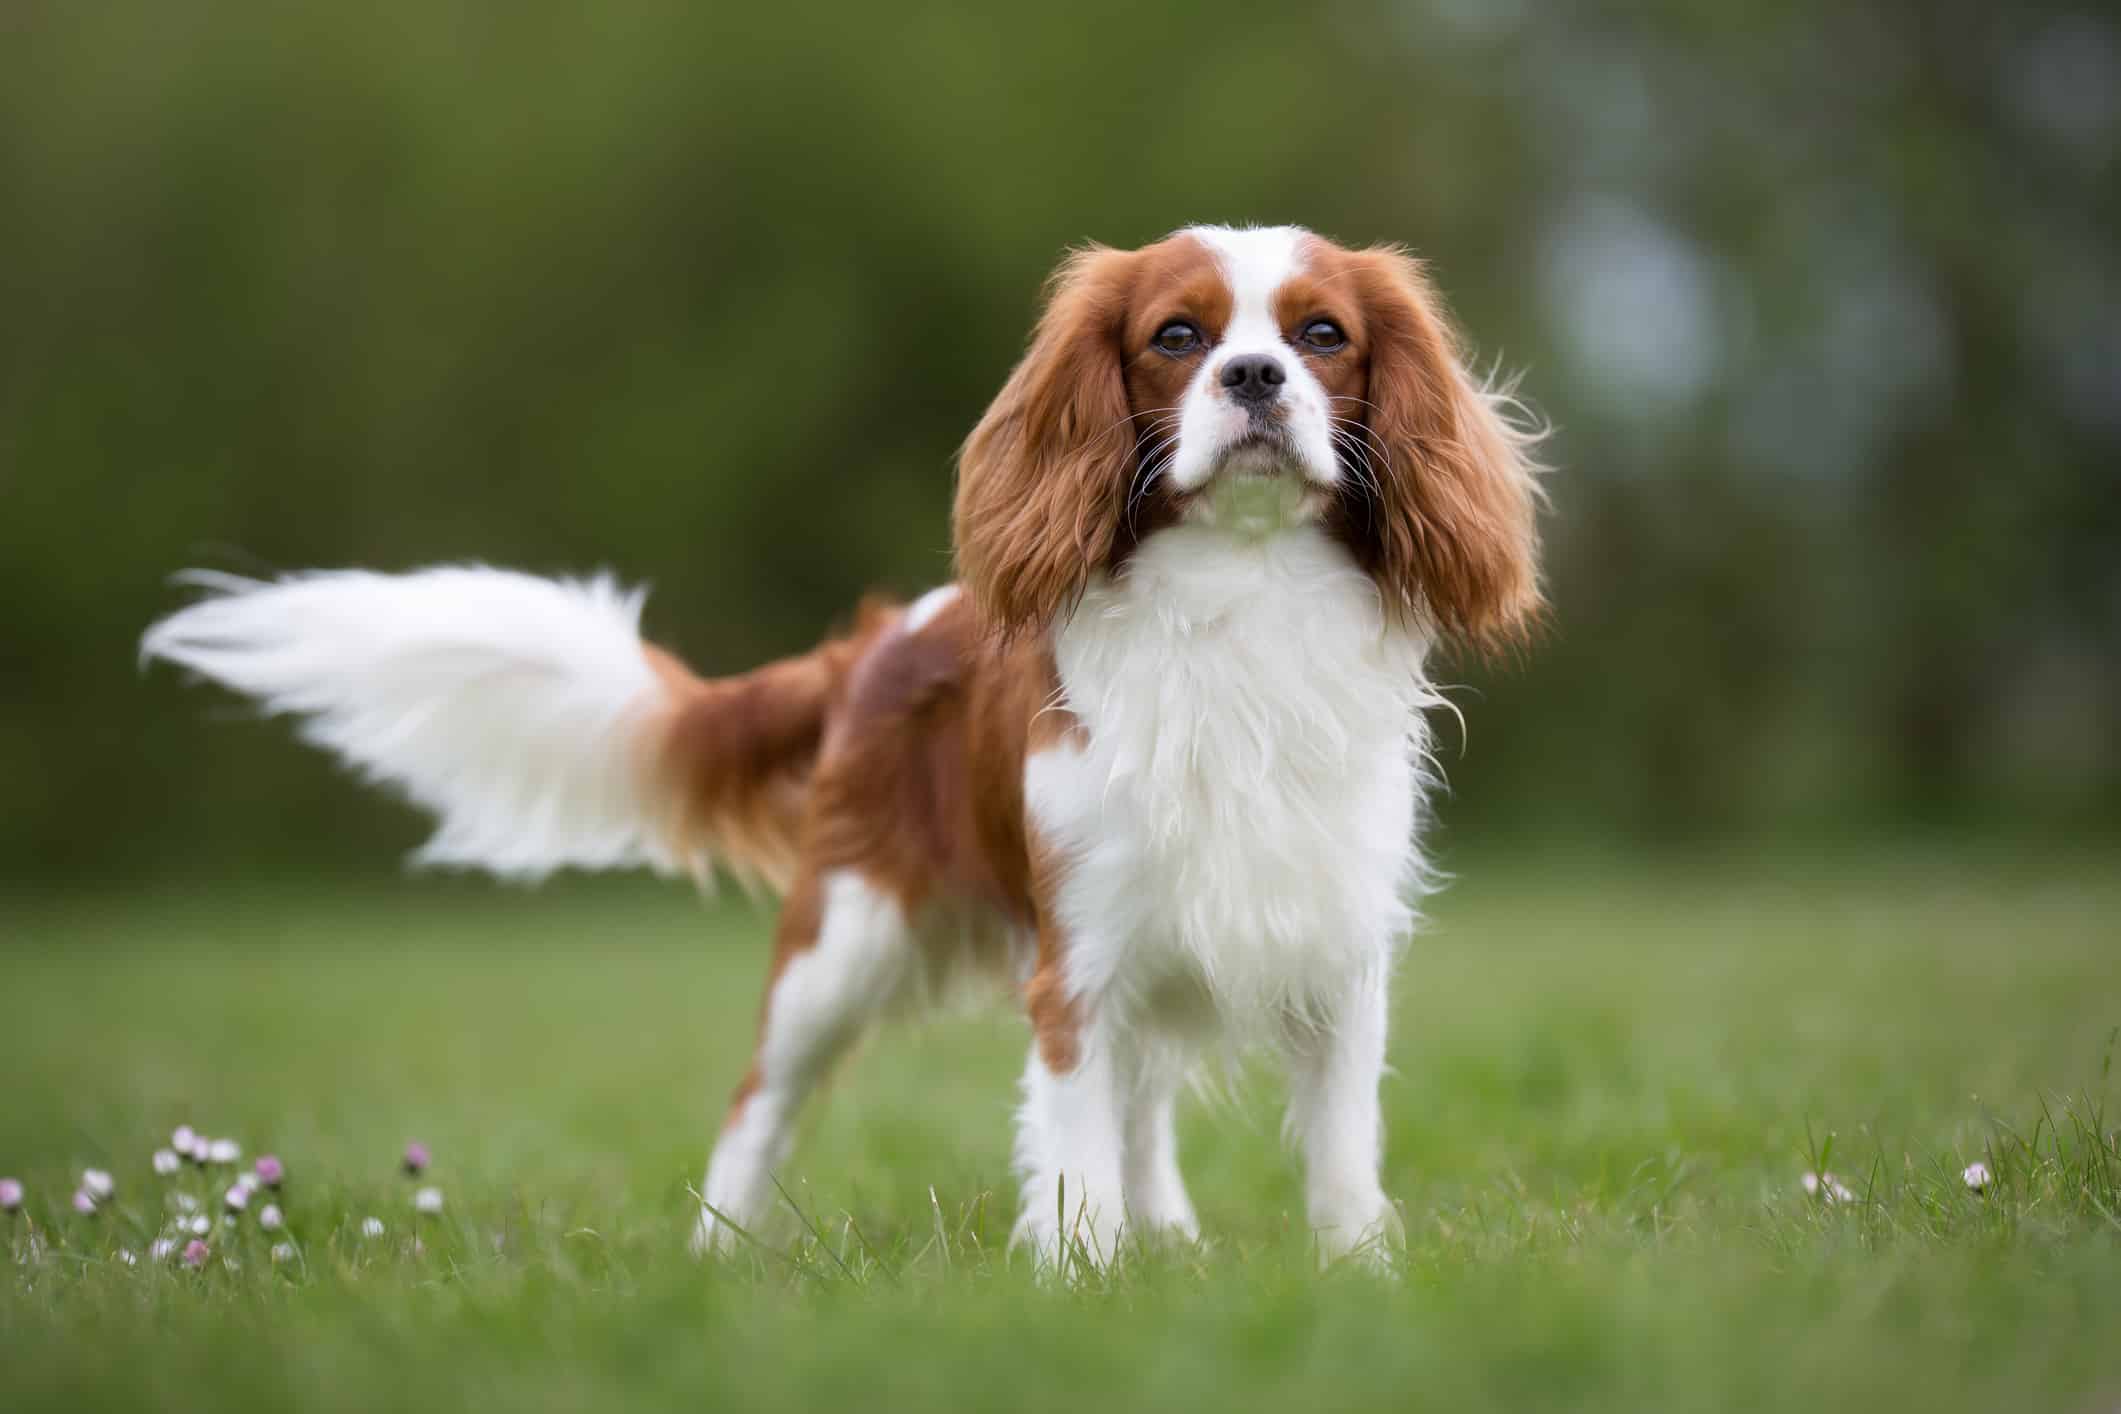 The Cavalier King Charles Spaniel: Information about this dog breed